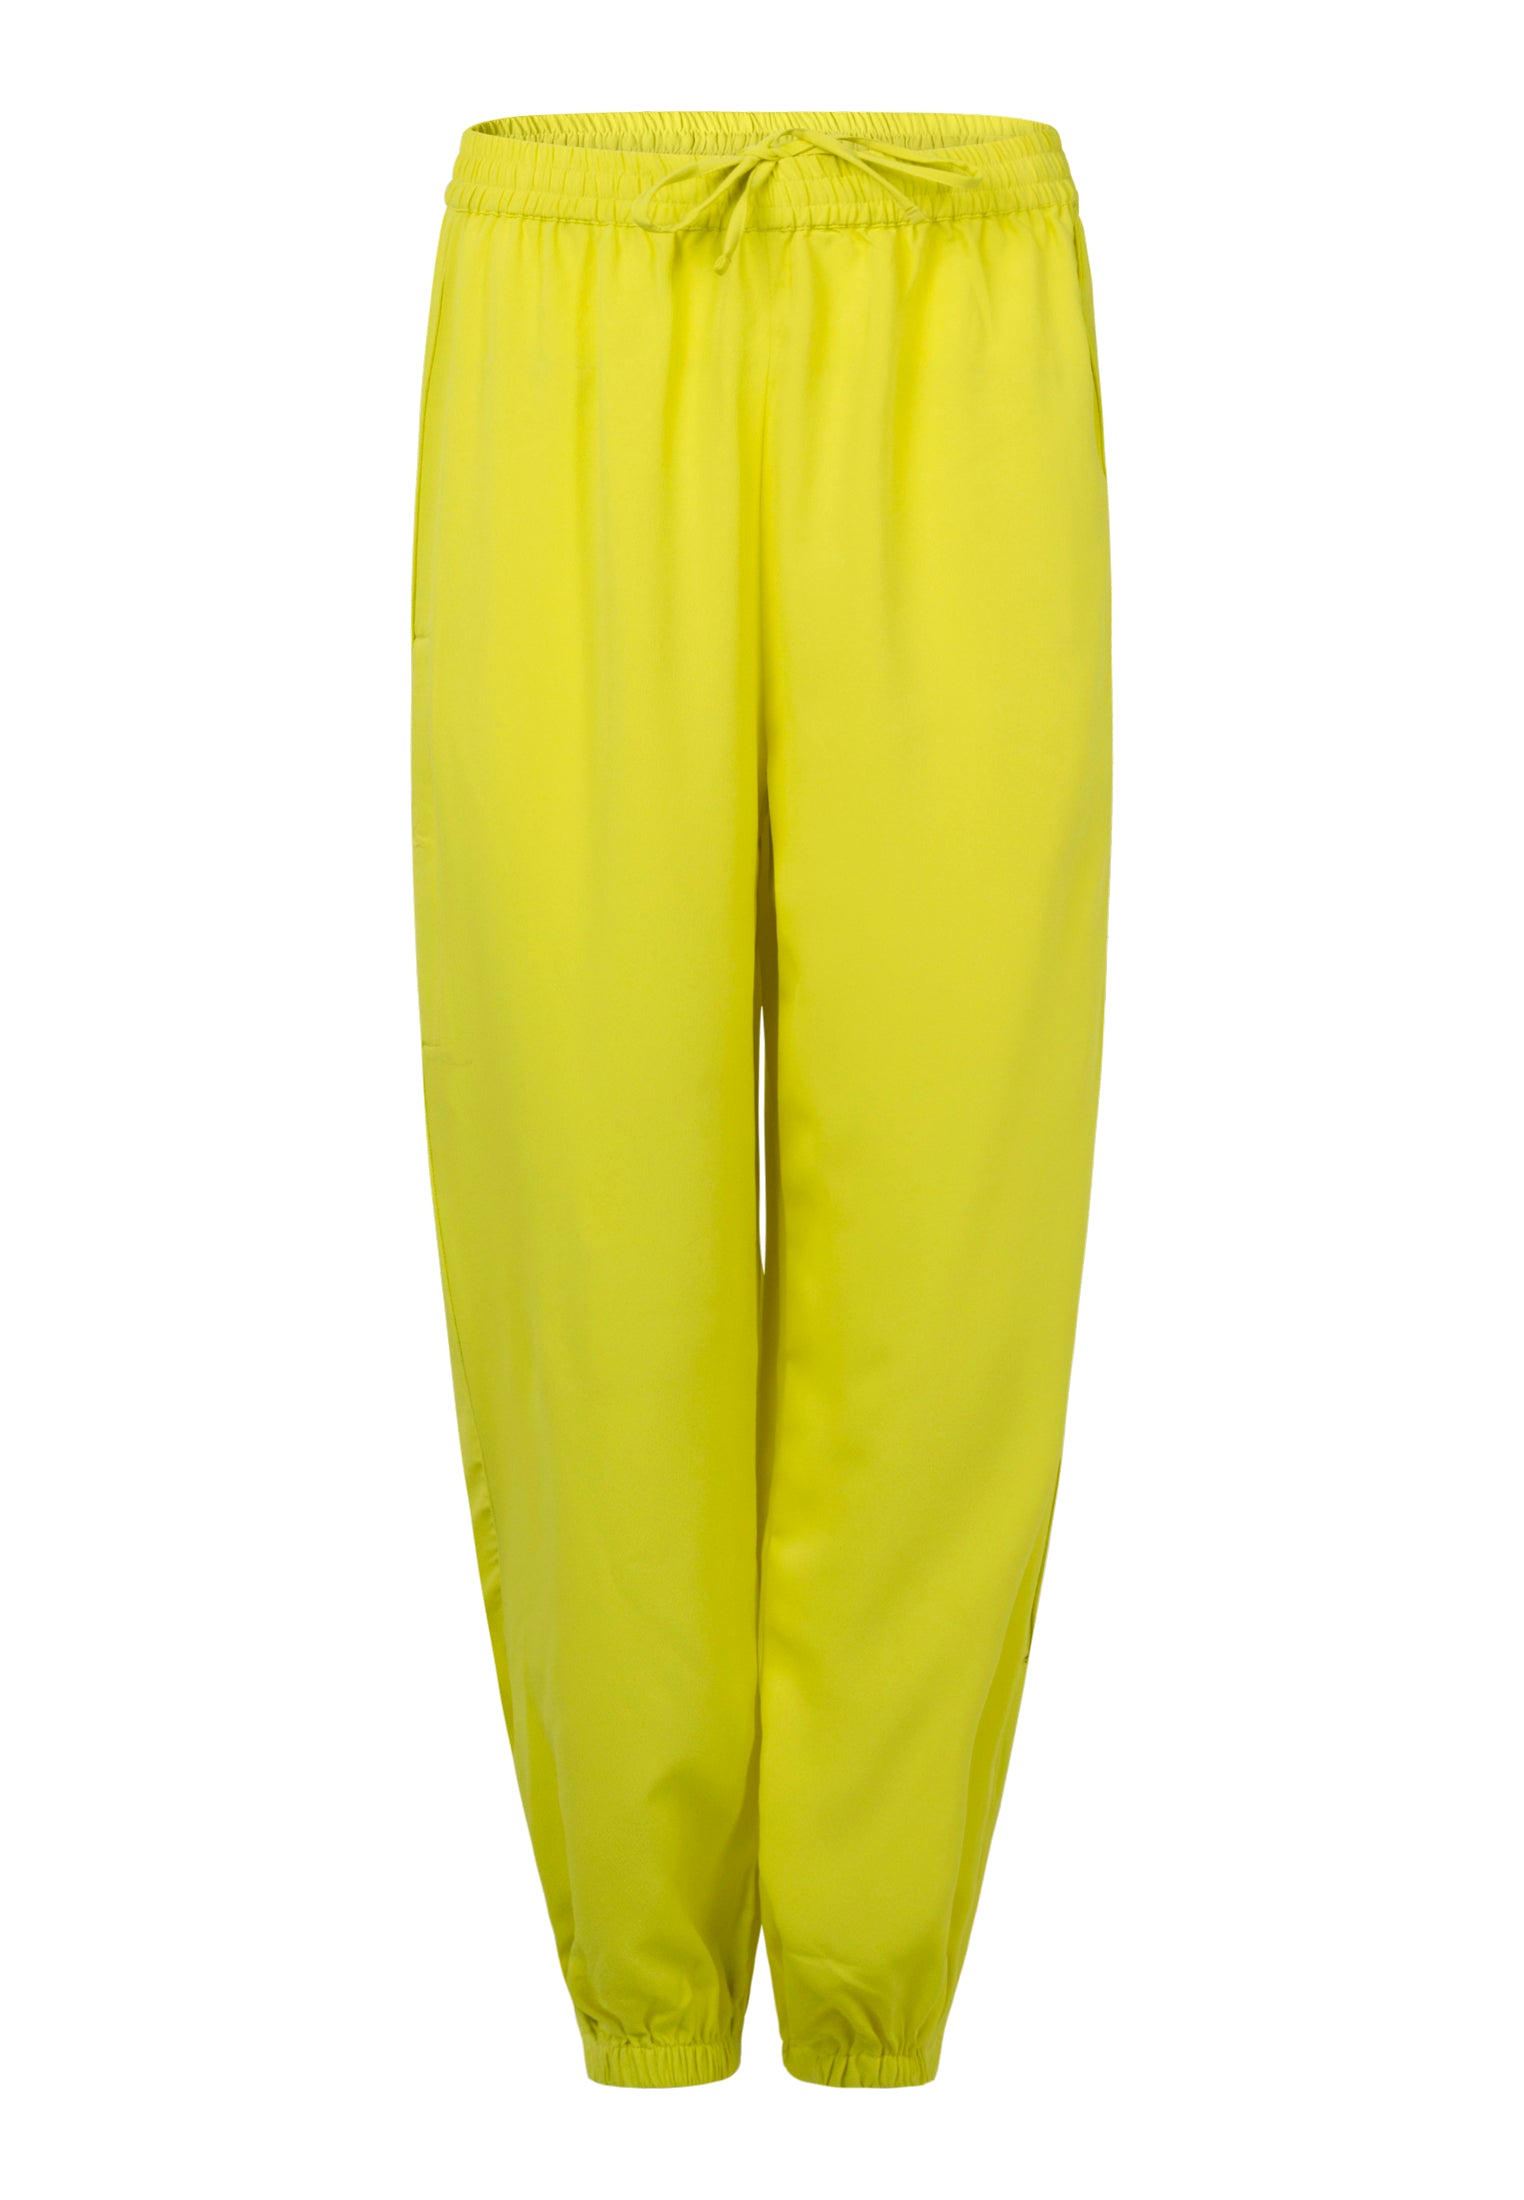 RELIGION Society Smart-Casual Yellow Trousers